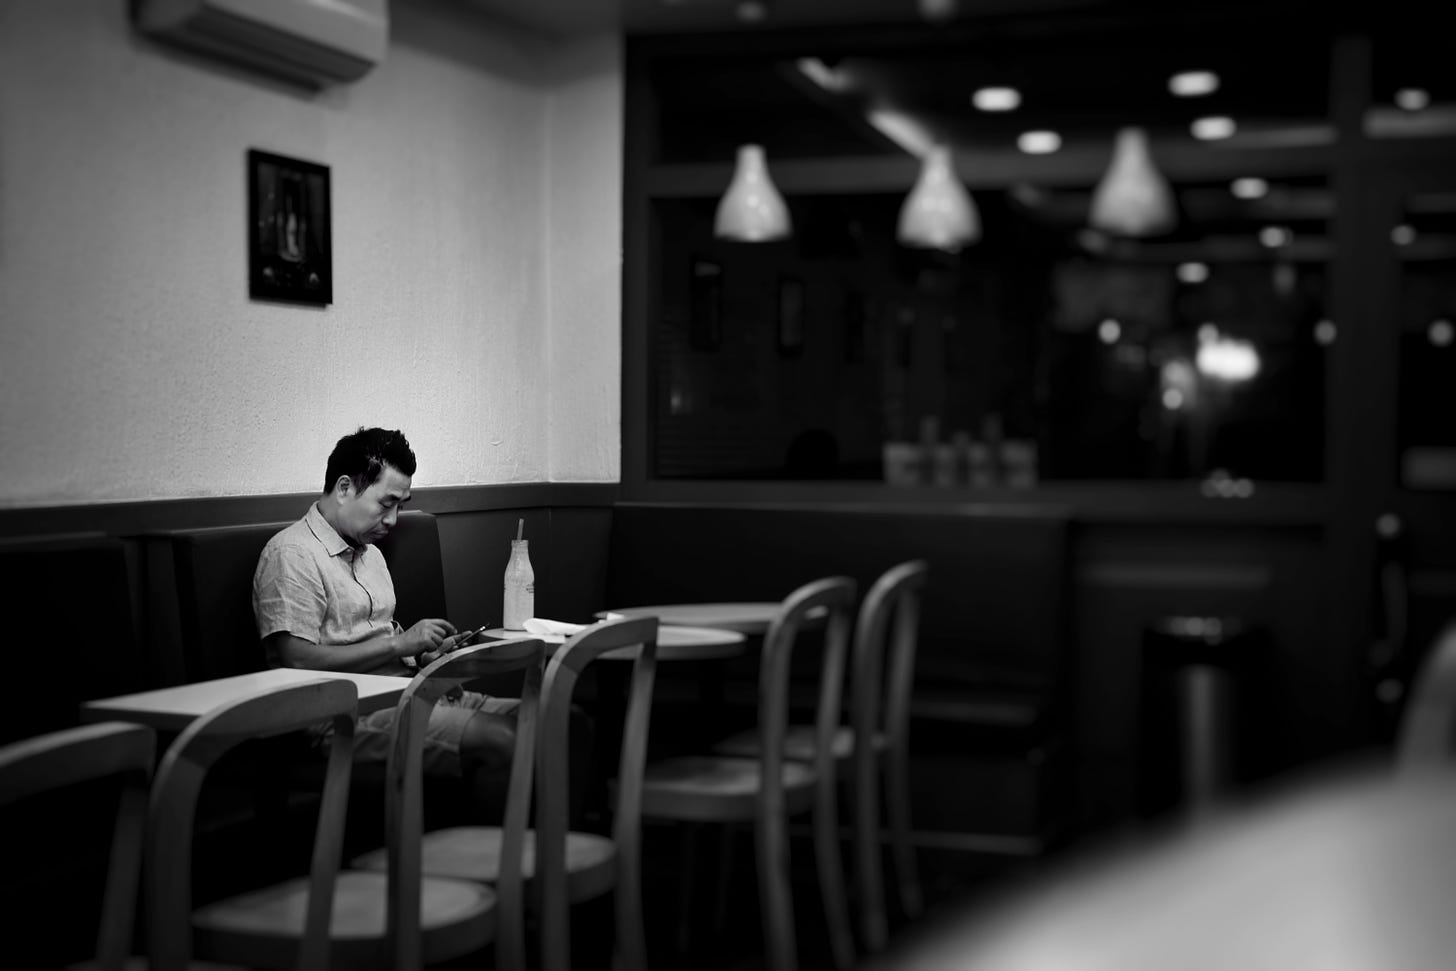 A man sits alone in a restaurant looking down at the table.